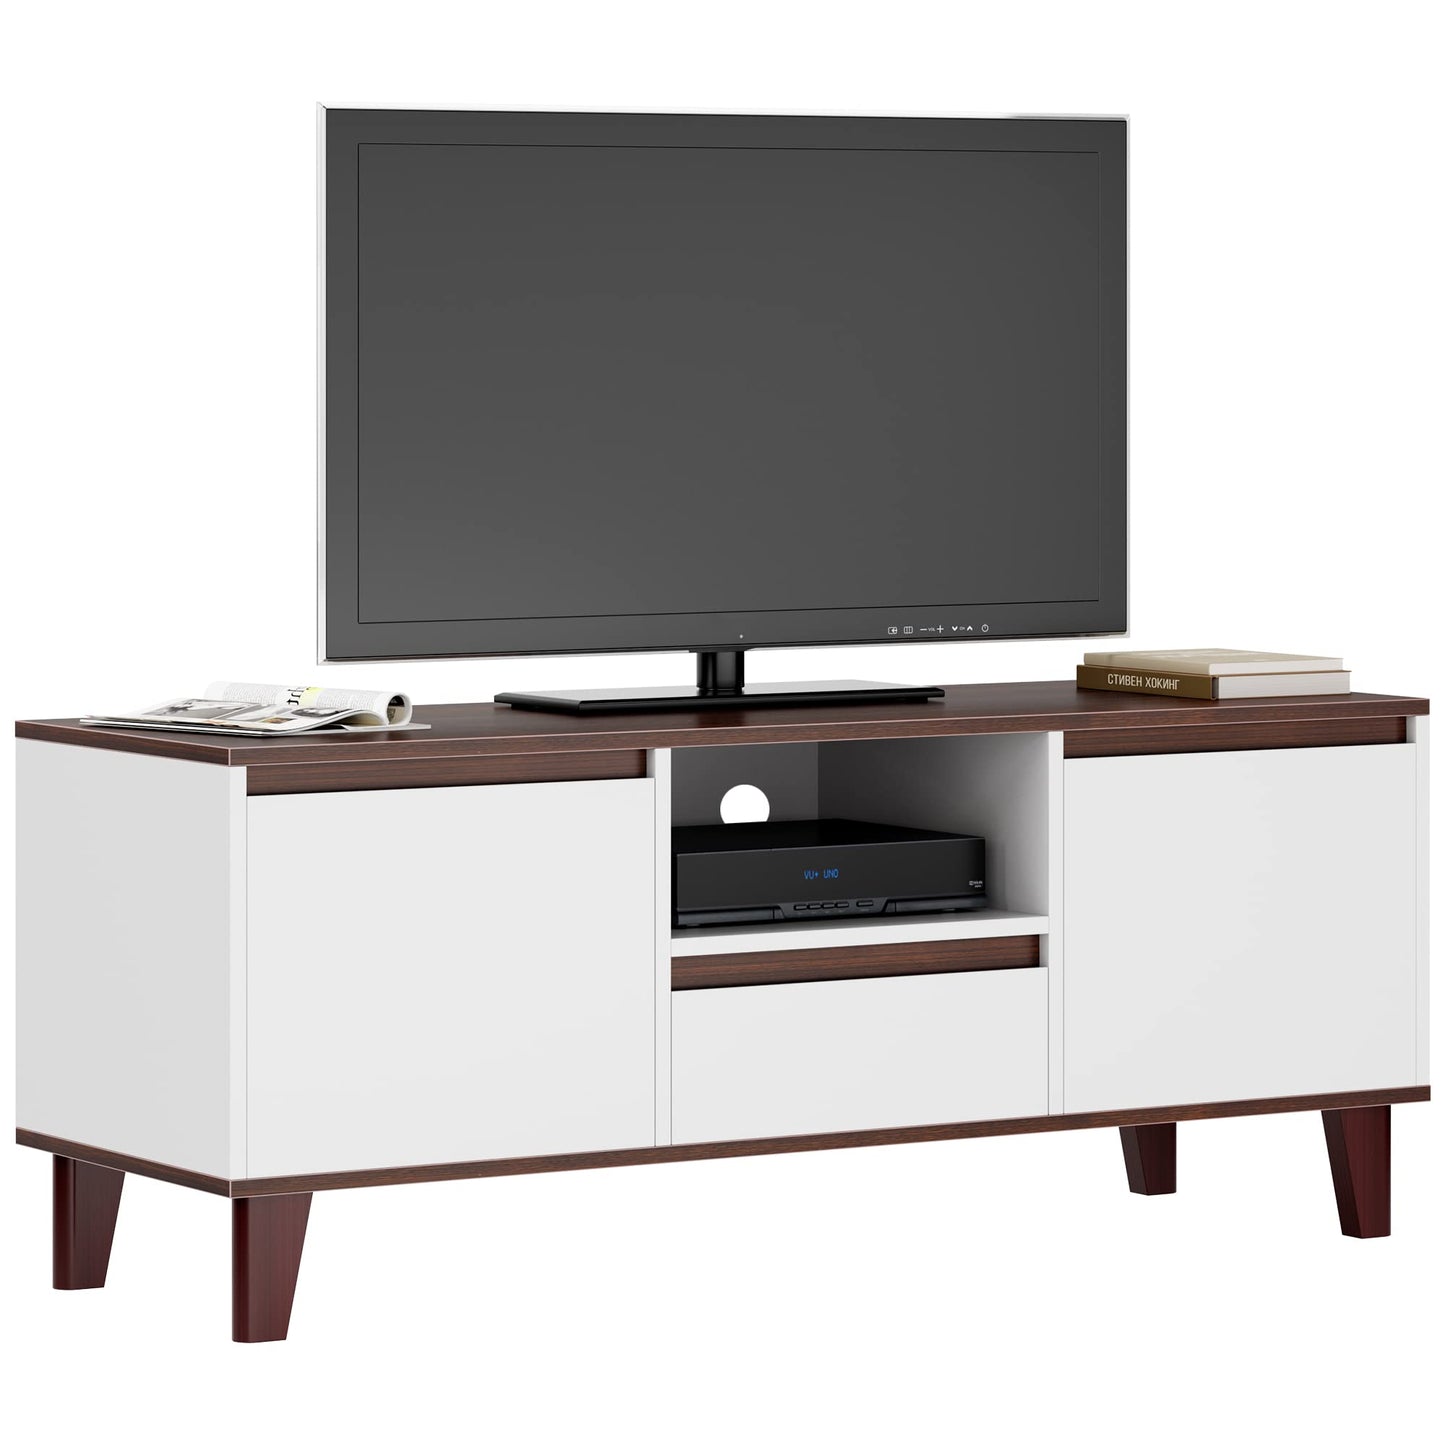 SogesHome TV Stand with 2-Door Cabinet, Entertainment Center for TVs Up with 1-Storage Cube&1-Drawer, TV Media Storage Console Table for Living Room, Bedroom, White&Brown